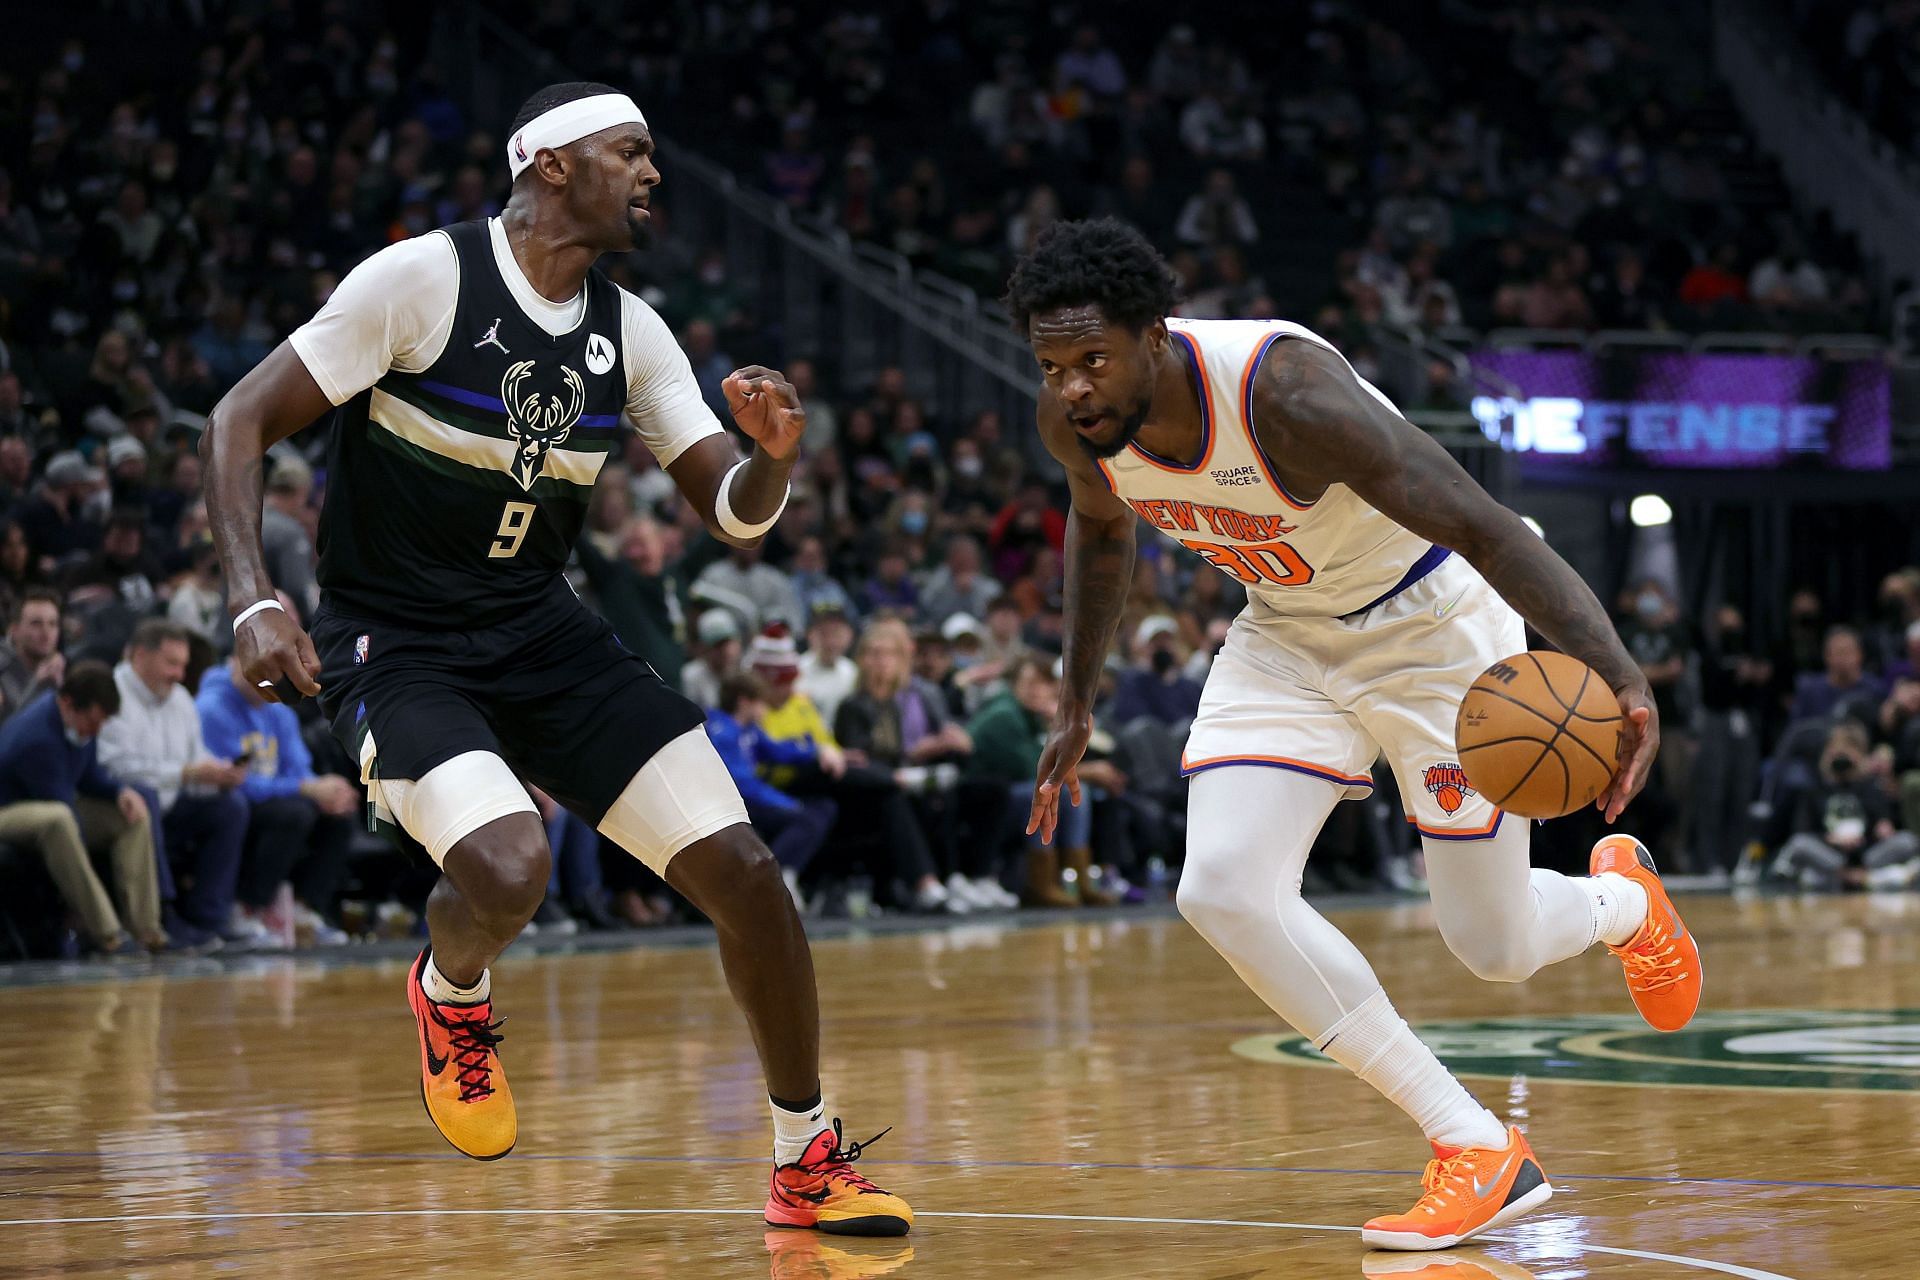 Julius Randle of the New York Knicks drives to the basket against Bobby Portis of the Milwaukee Bucks.